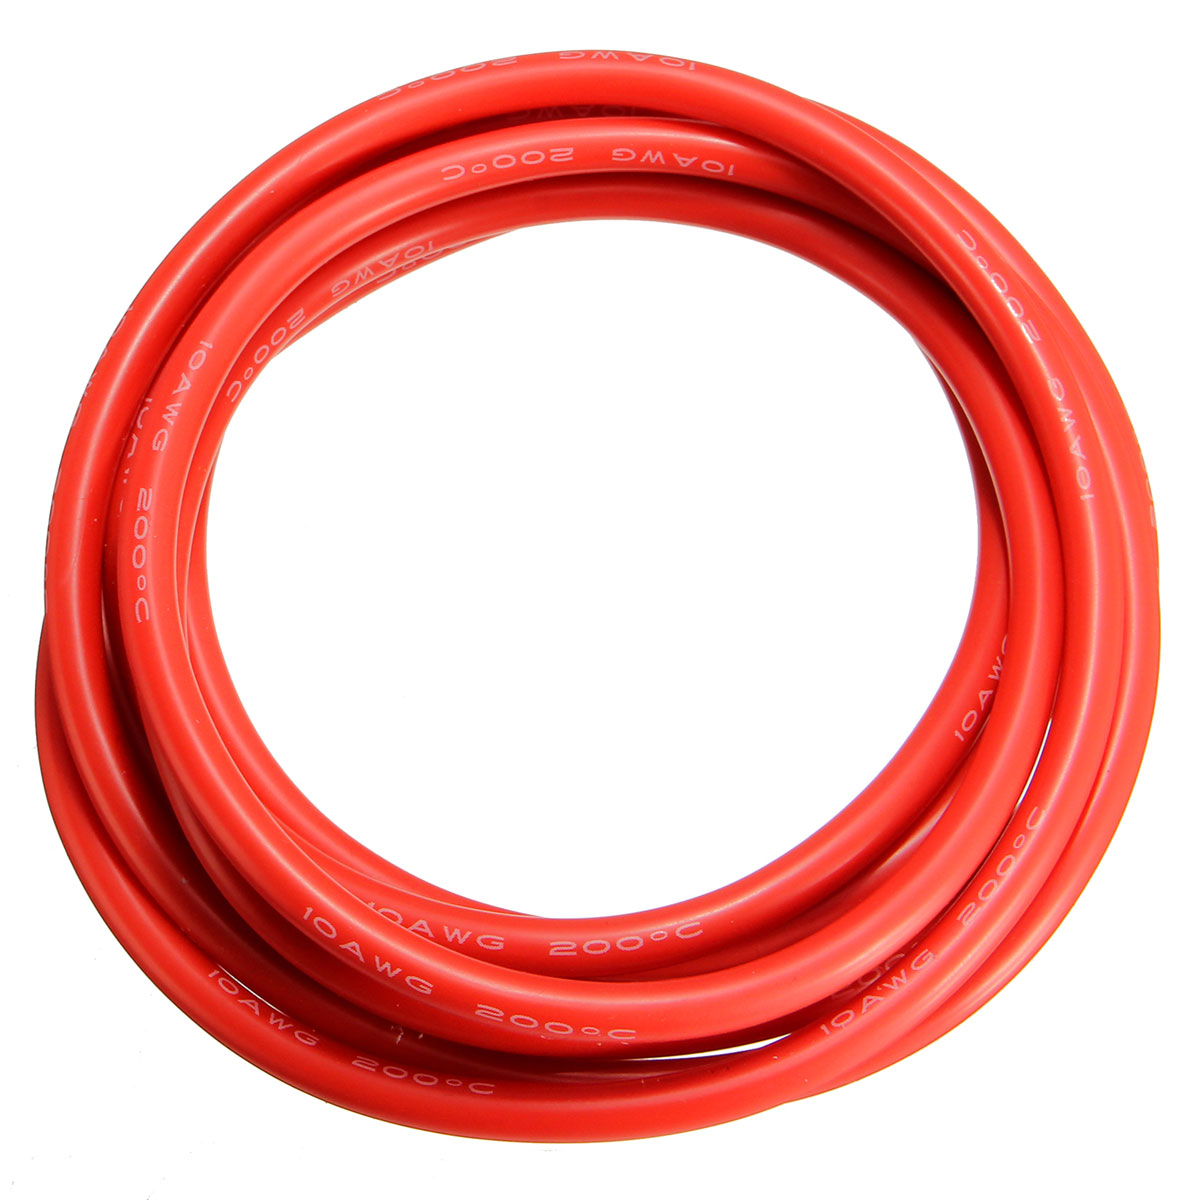 DANIU-2-Meter-Red-Silicone-Wire-Cable-10121416182022AWG-Flexible-Cable-1170284-6